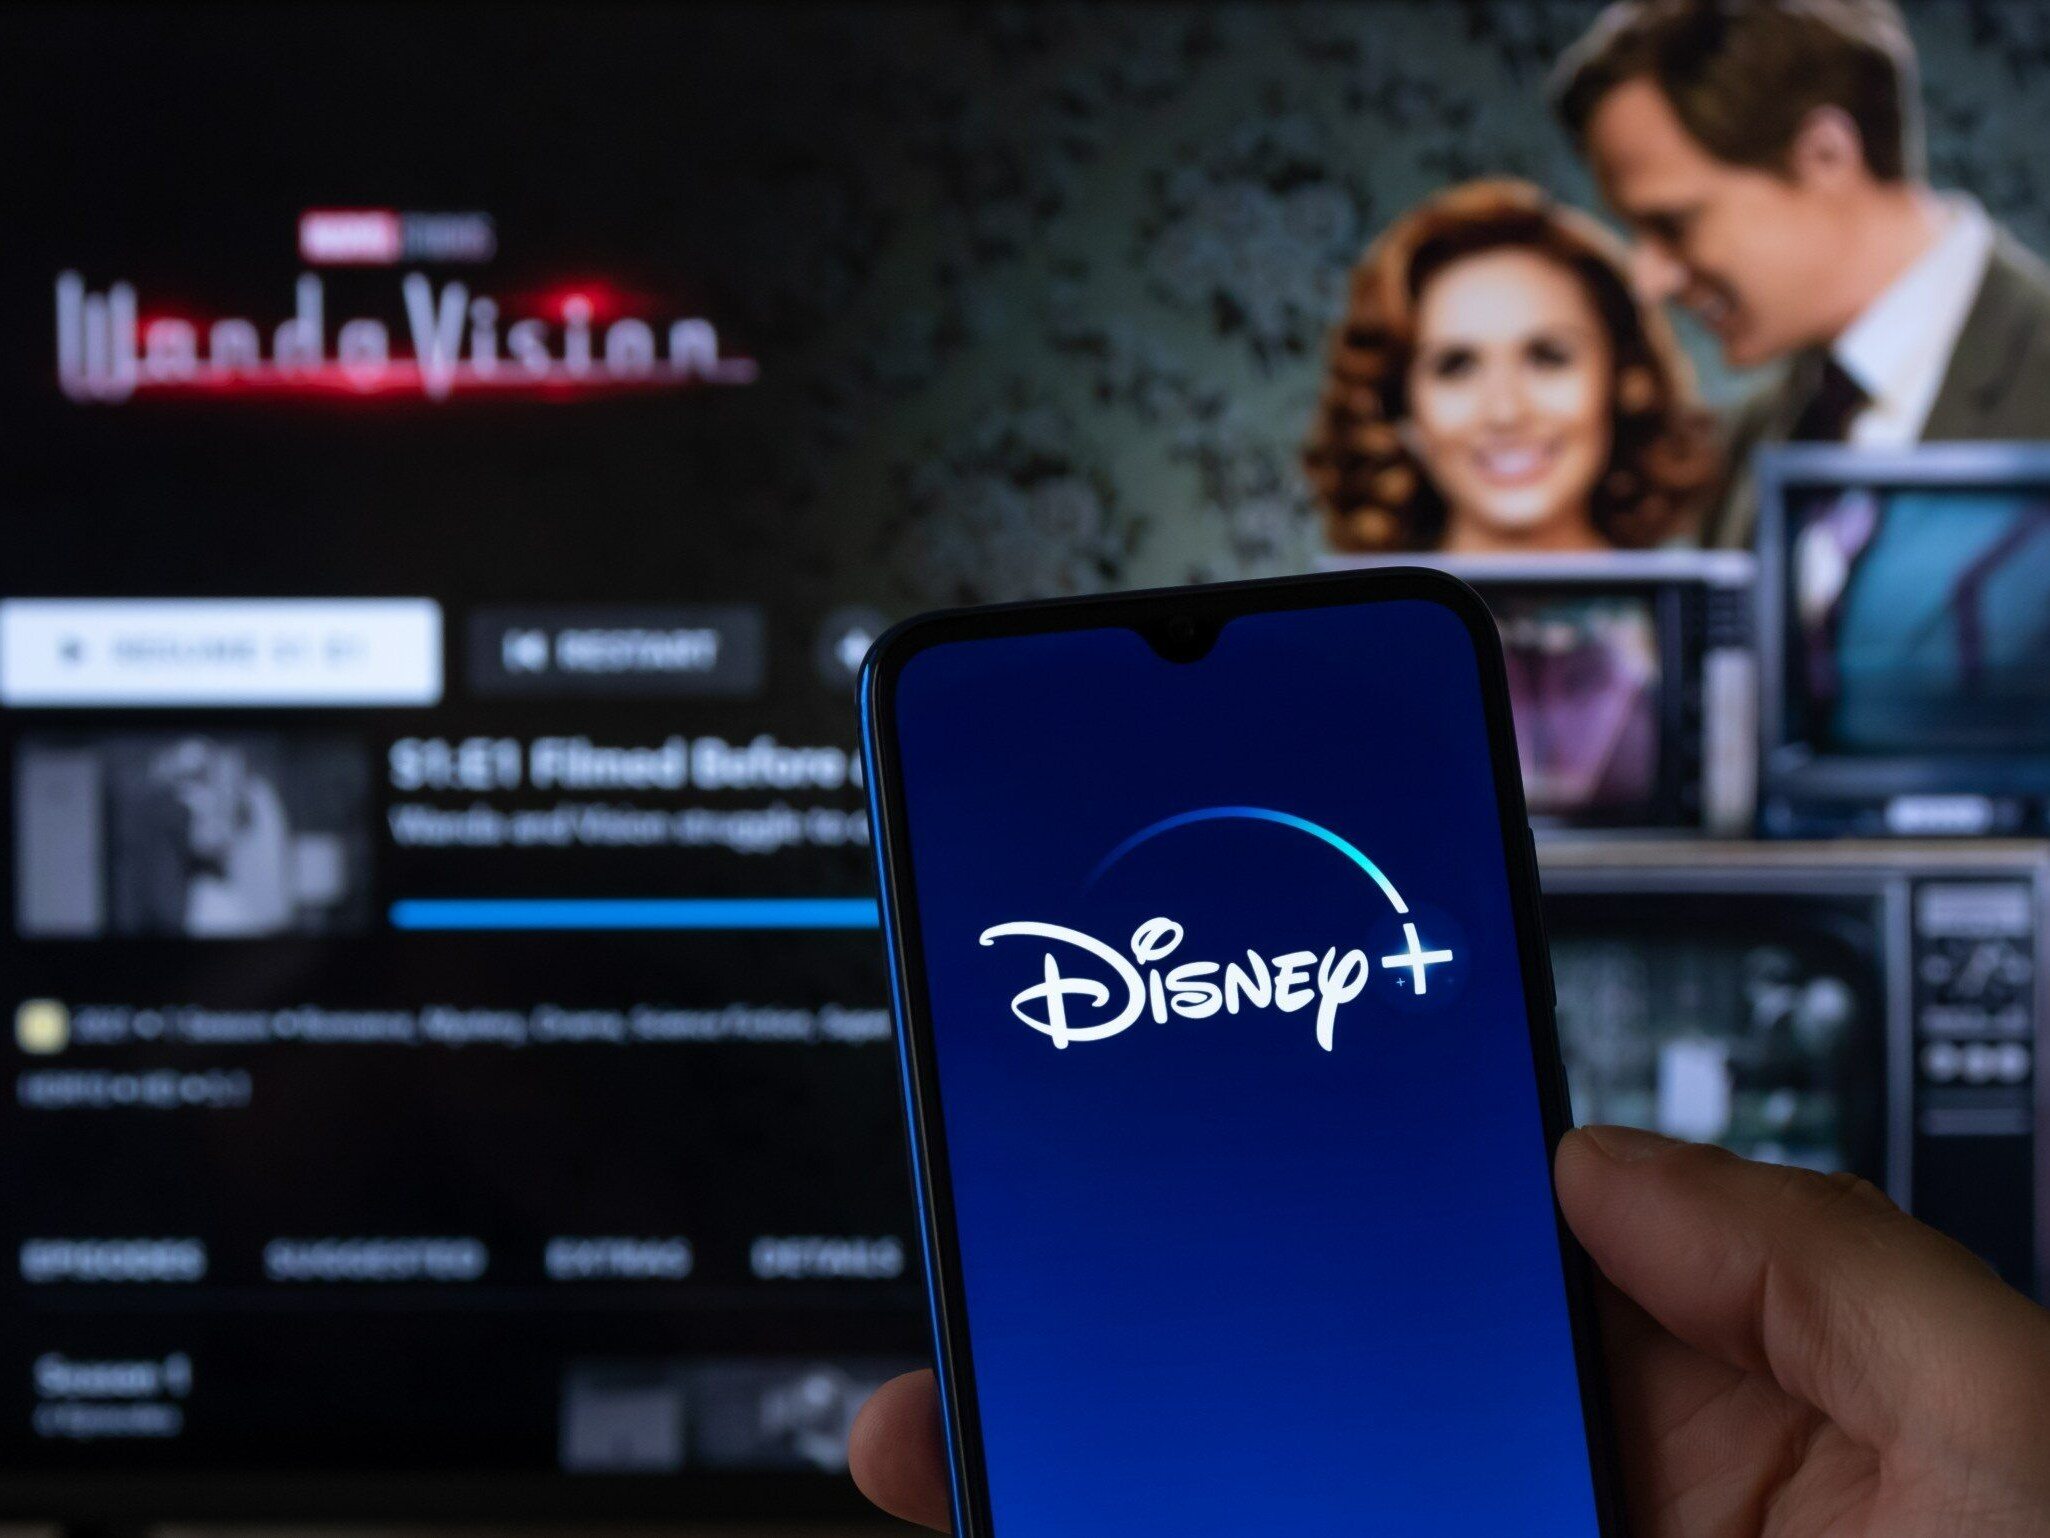 Will Disney repeat Netflix's move?  I want to block password sharing